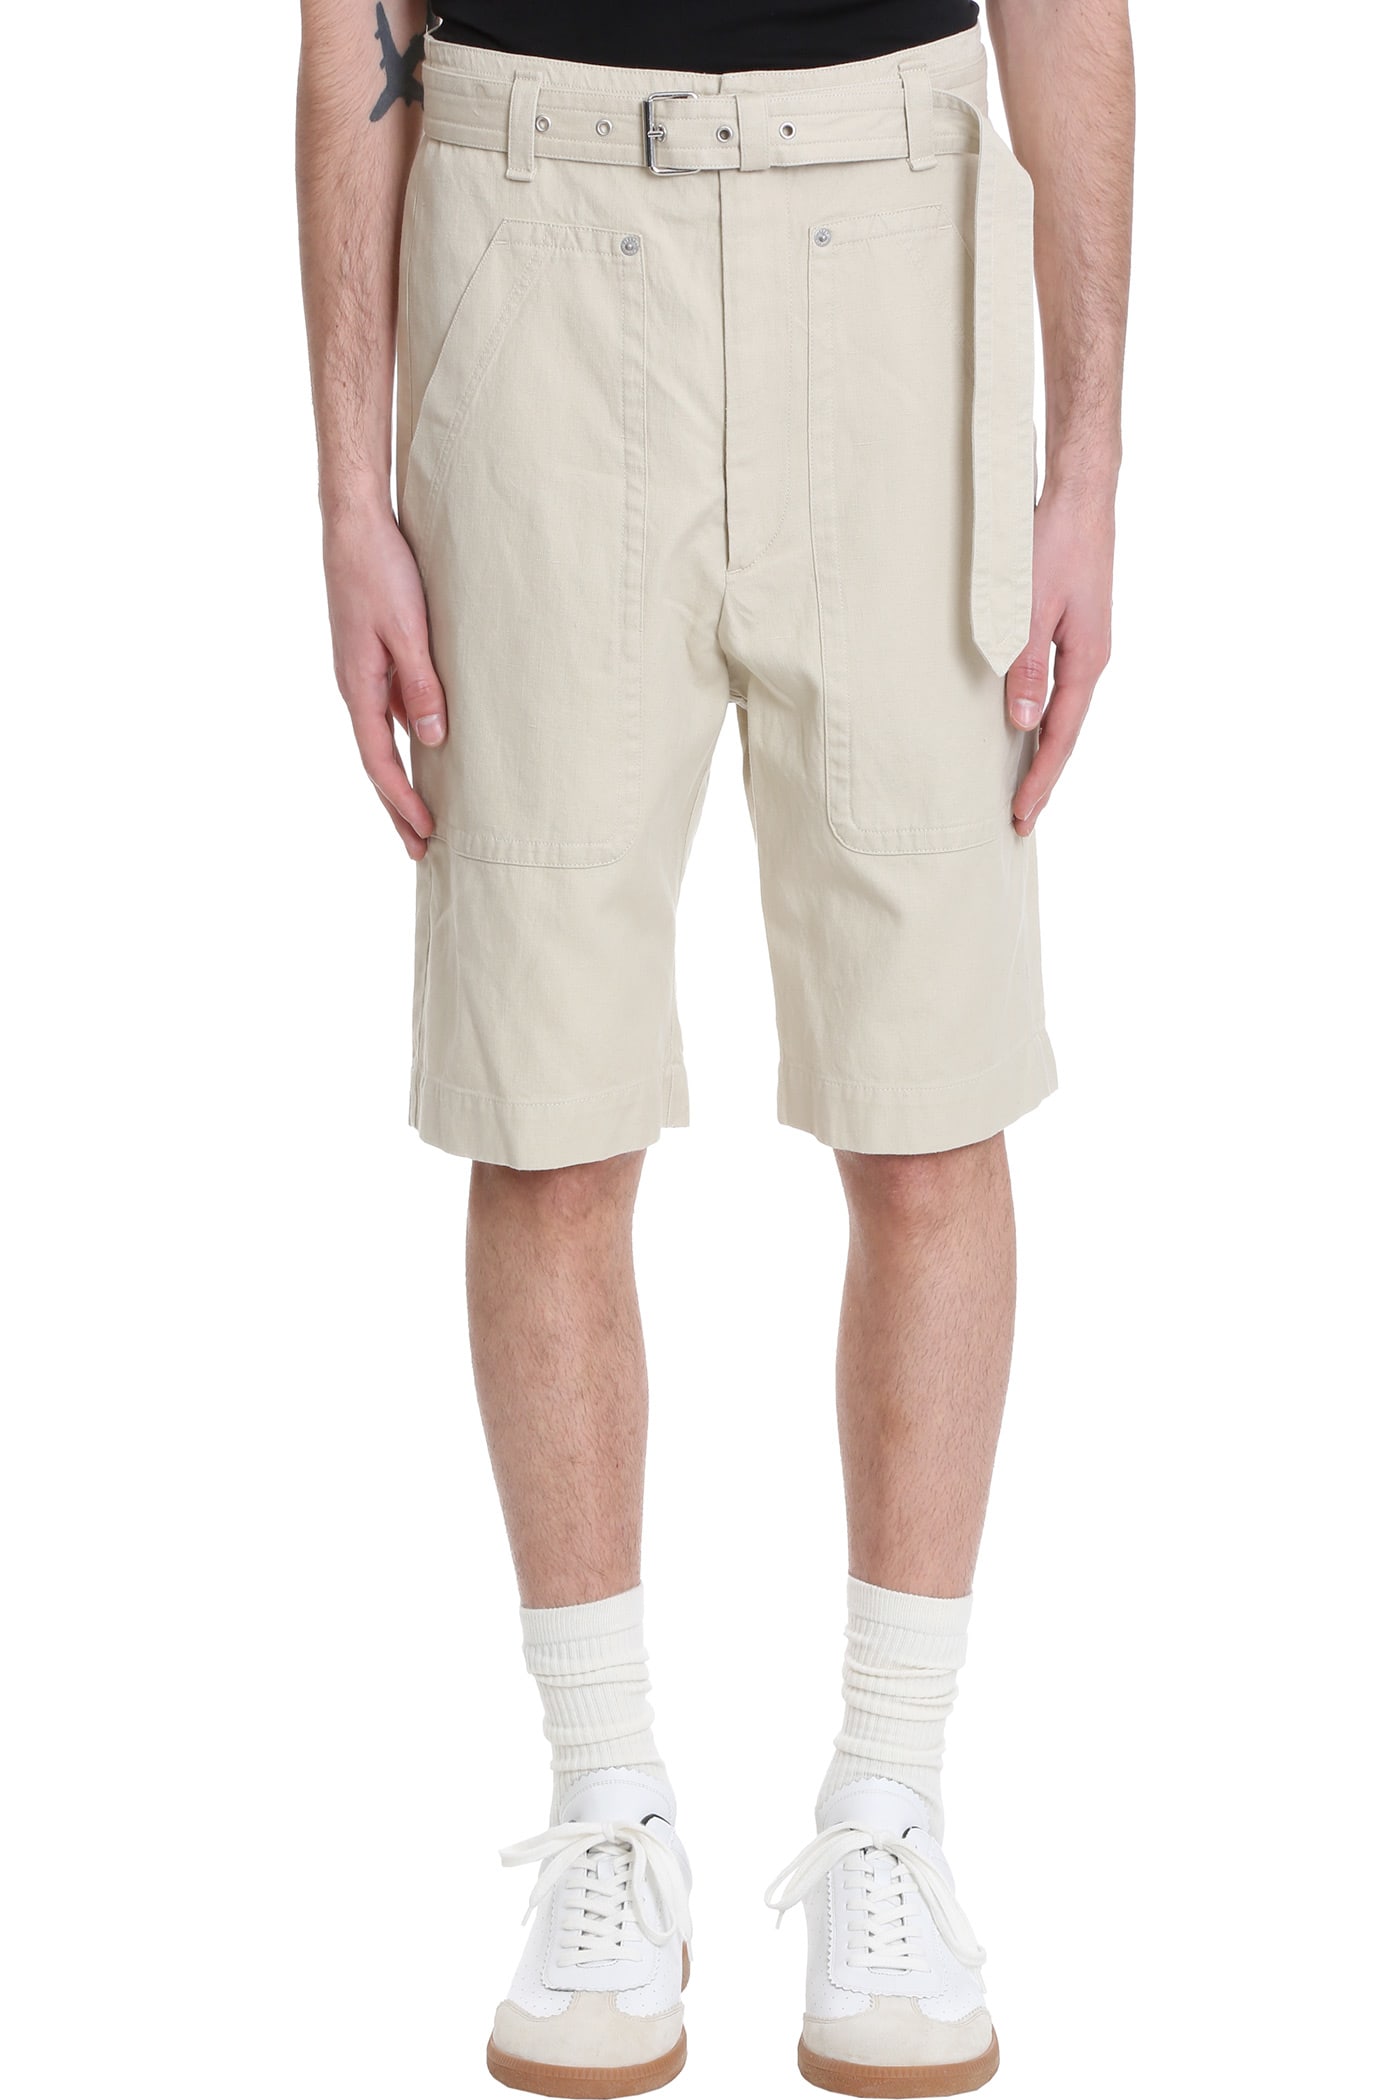 Isabel Marant Paolino Shorts In Beige Cotton